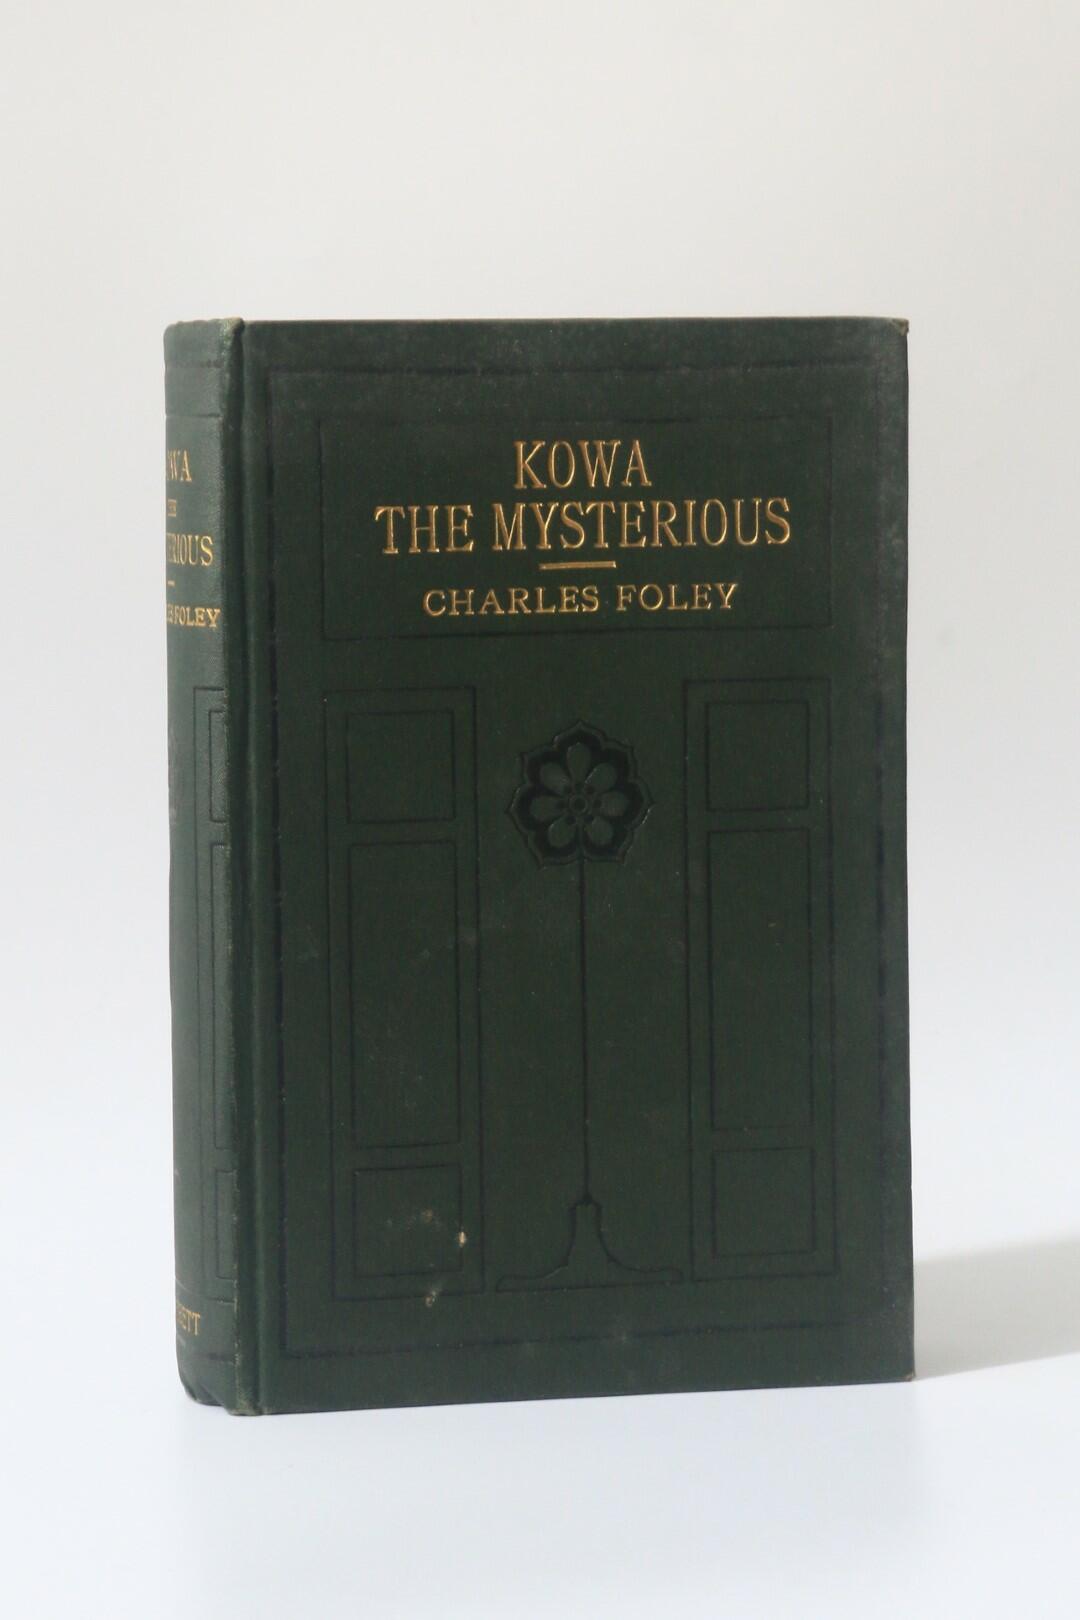 Charles Foley - Kowa The Mysterious - Everett & Co., 1909, First Edition.